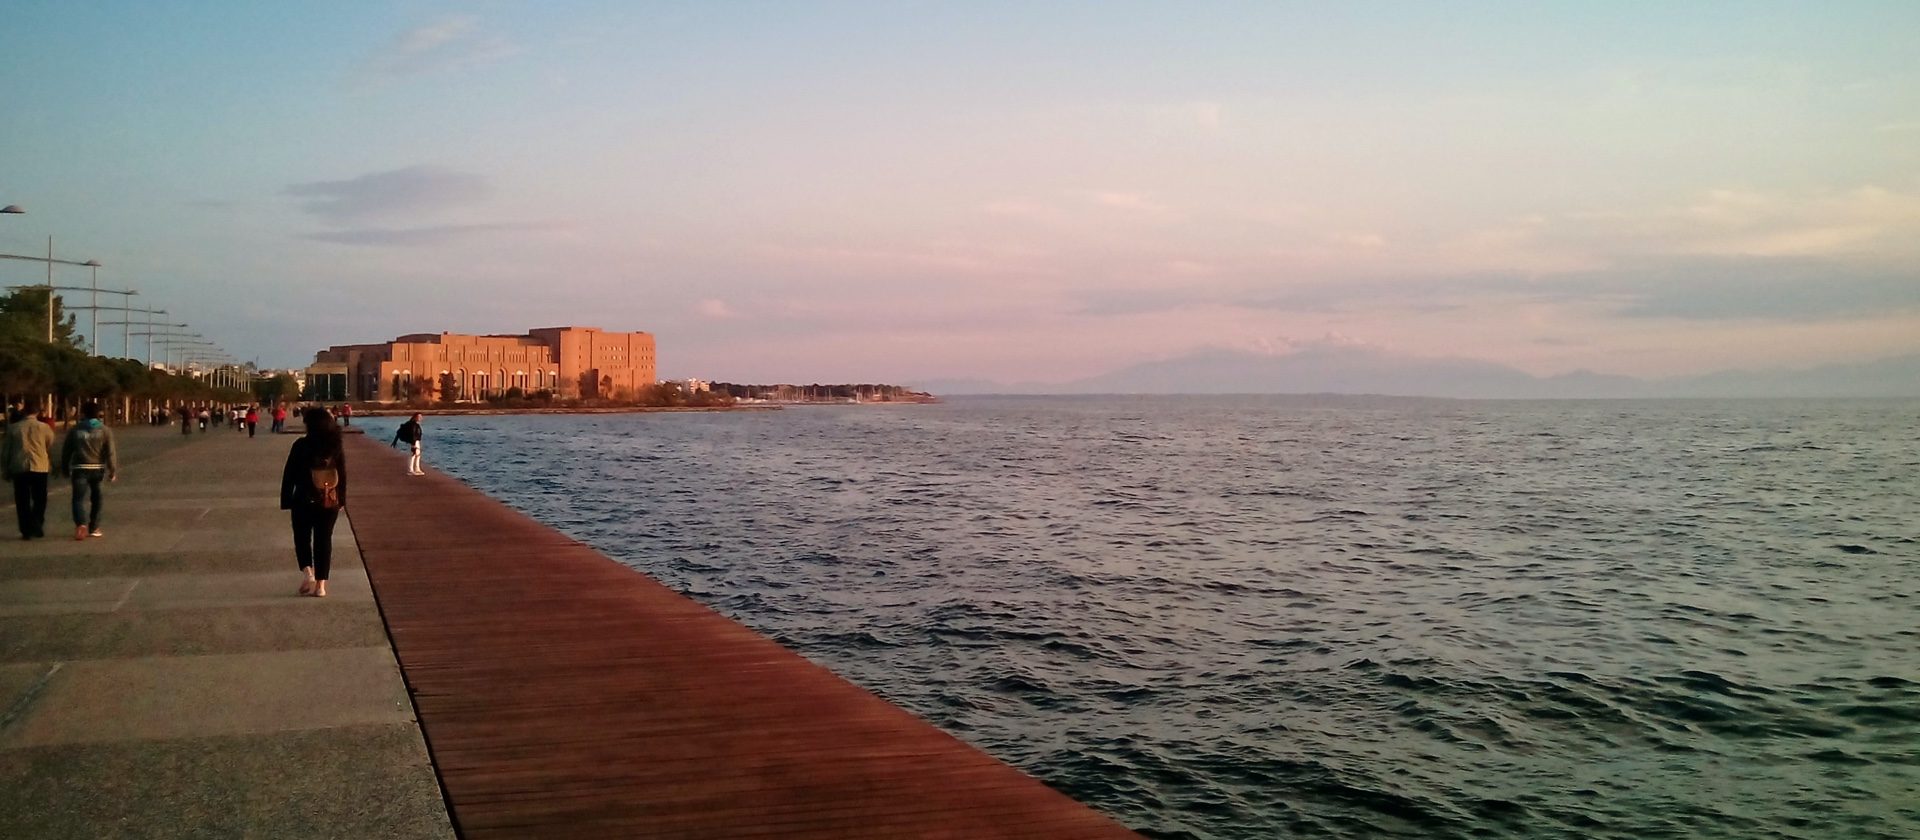 The Thessaloniki sea with the concert hall in the background